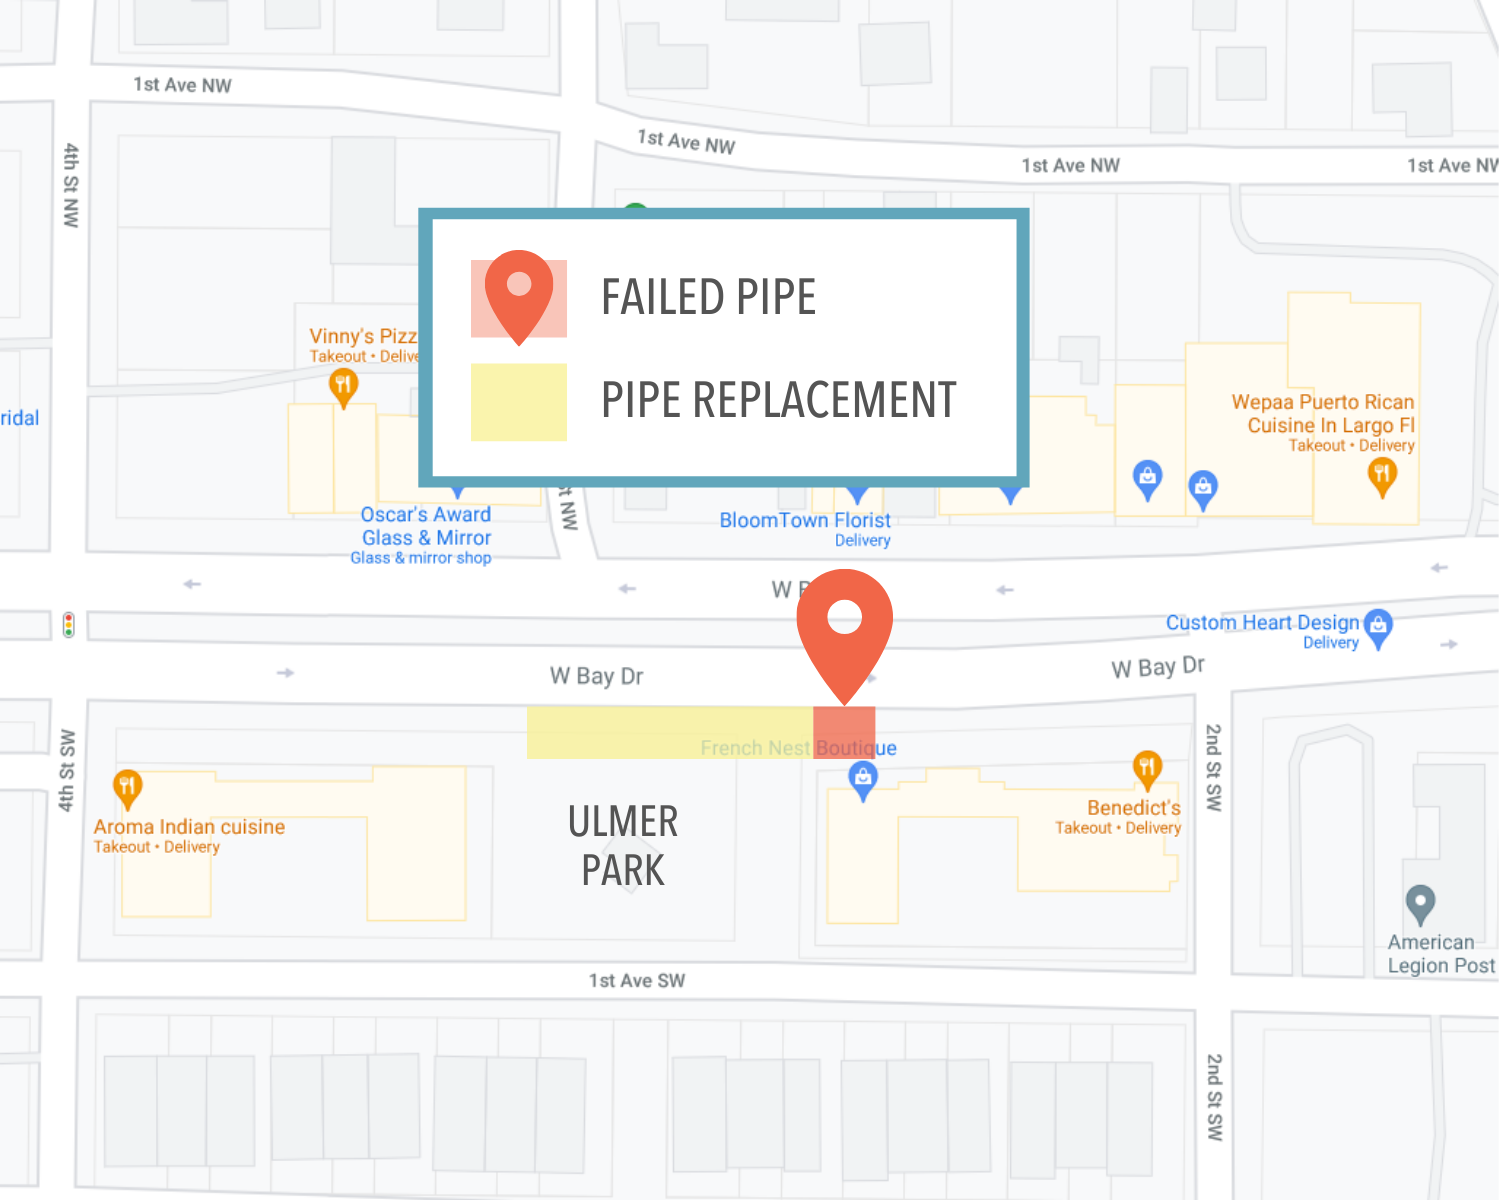 PIPE REPLACEMENT